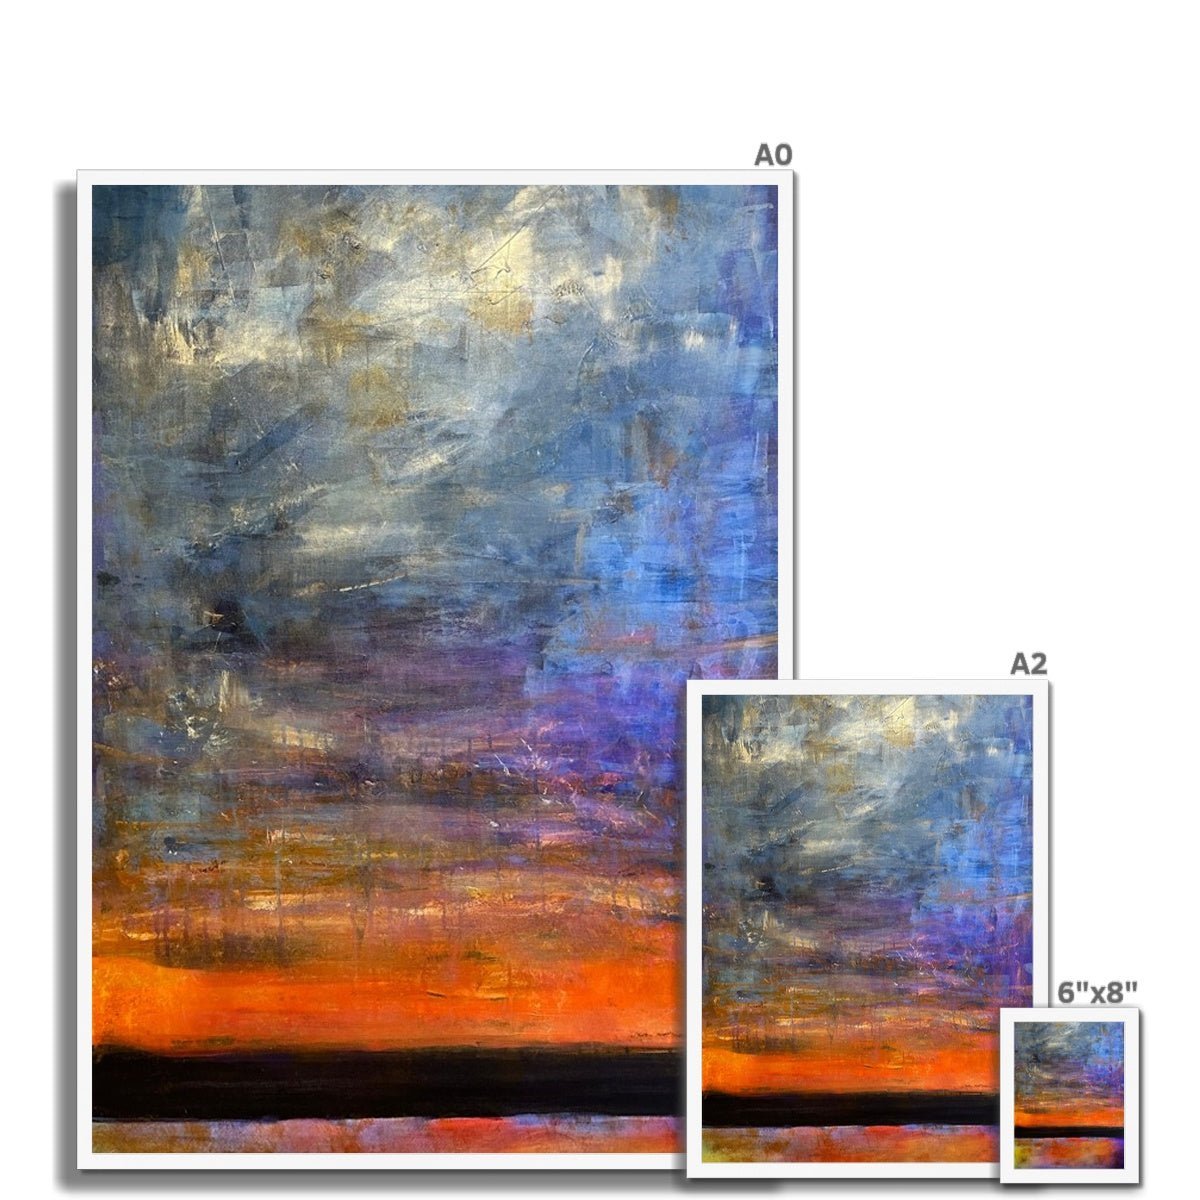 Horizon Dreams Abstract Painting | Framed Prints From Scotland-Framed Prints-Abstract & Impressionistic Art Gallery-Paintings, Prints, Homeware, Art Gifts From Scotland By Scottish Artist Kevin Hunter